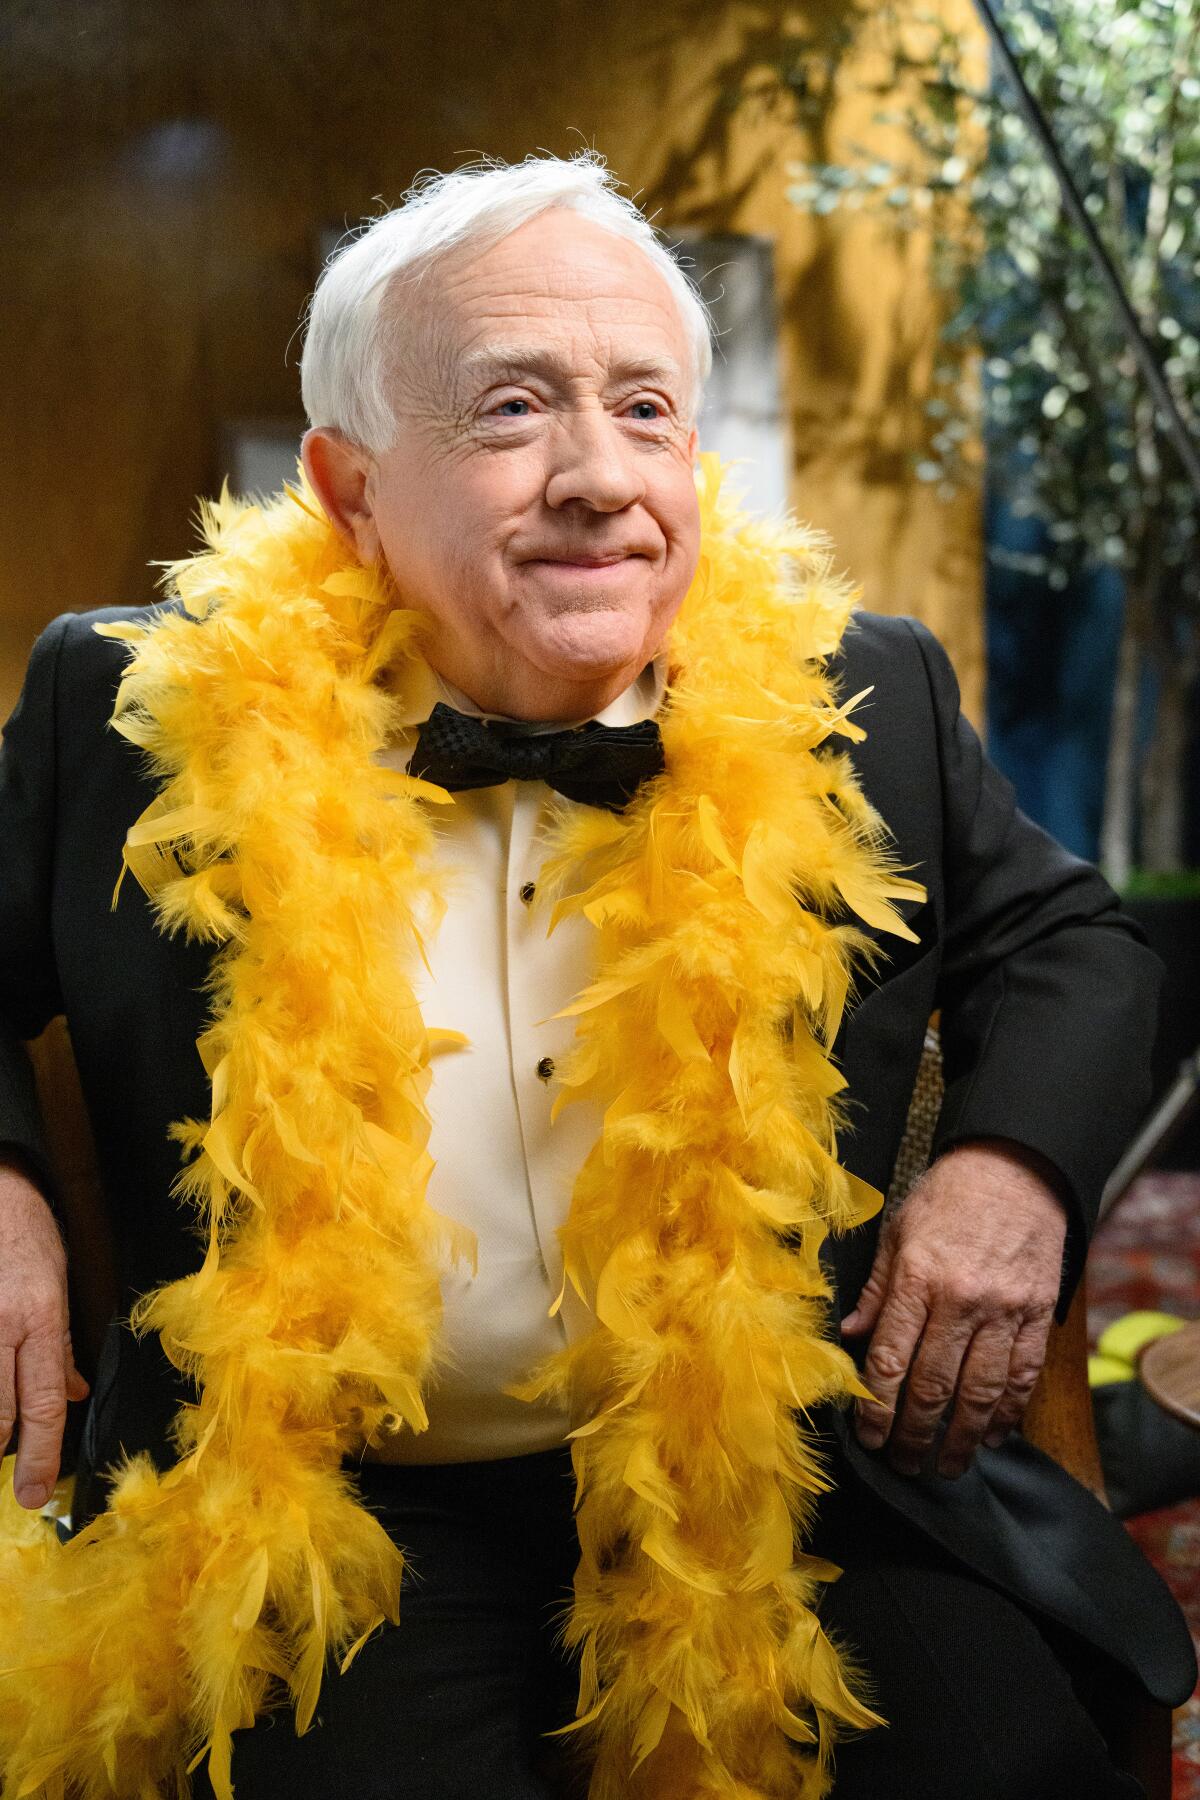 A man wearing a tuxedo accented by a bright yellow feather boa.